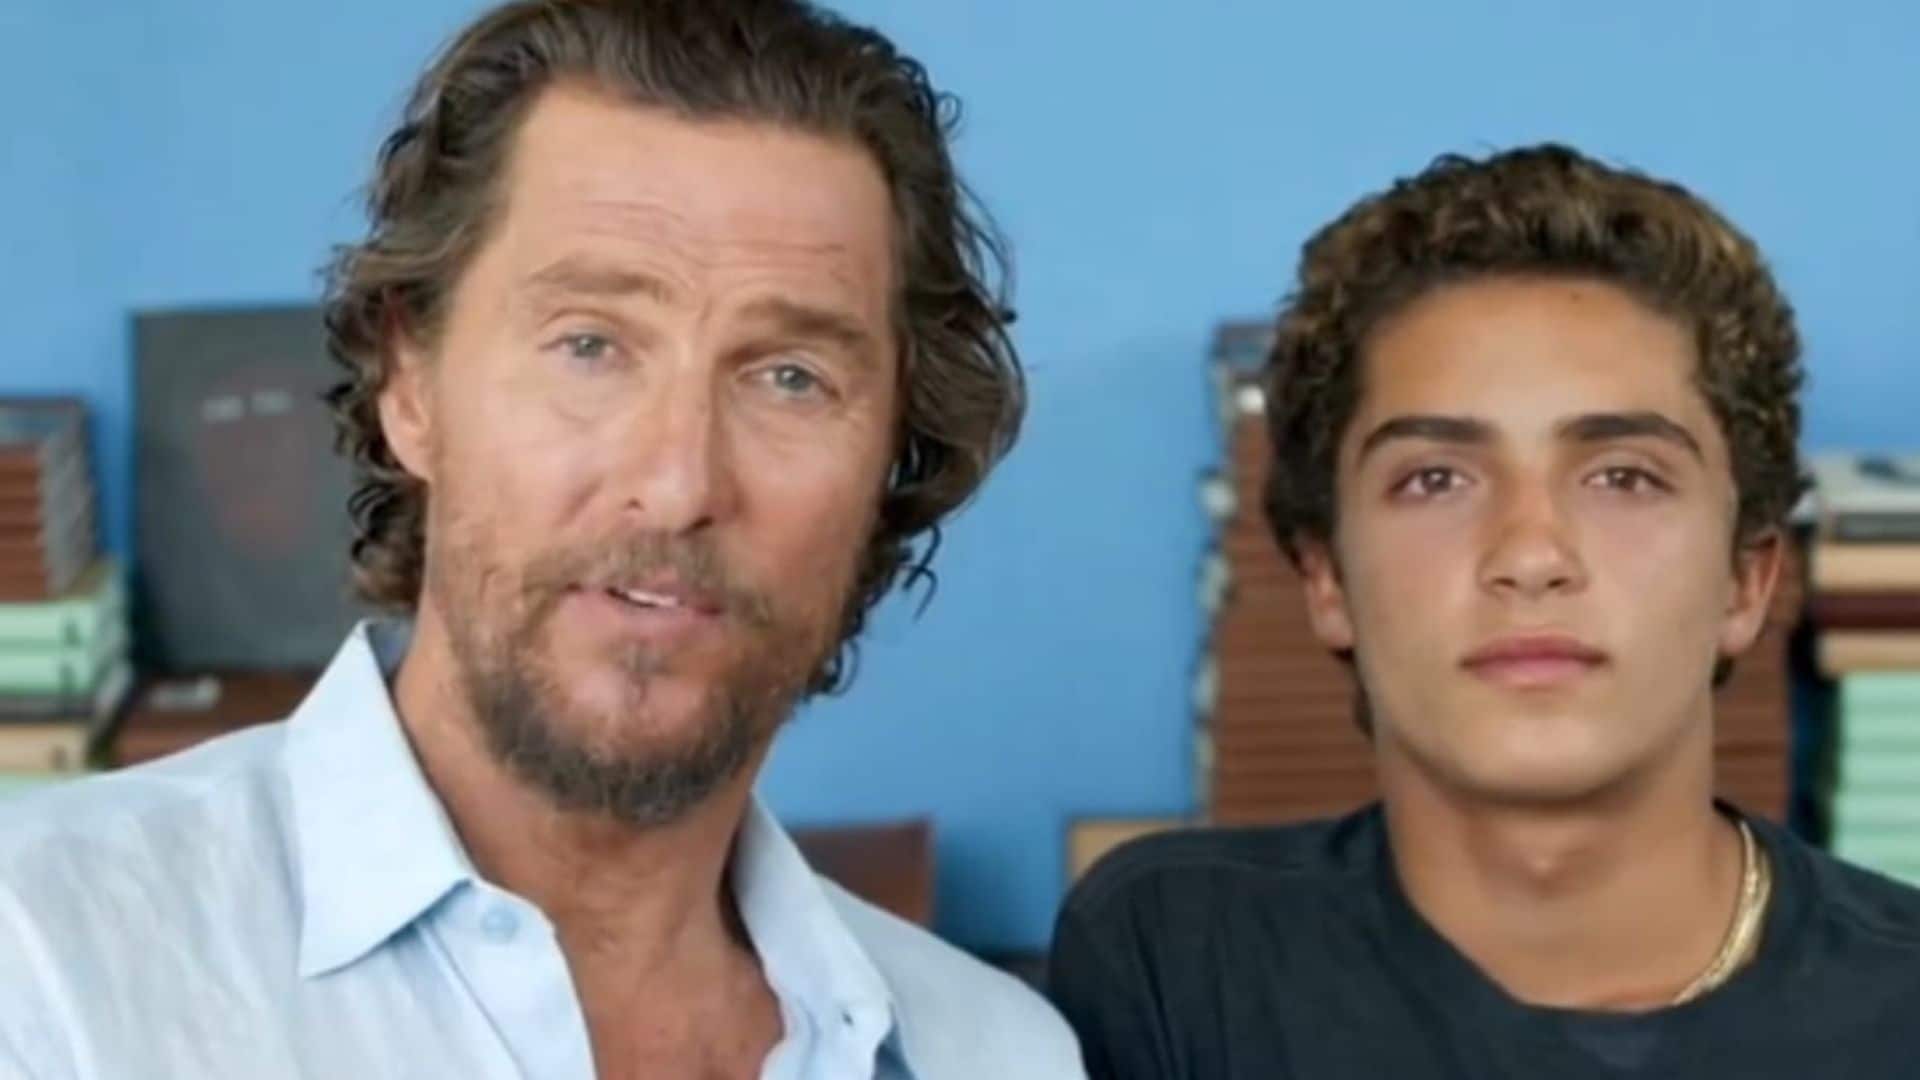 Matthew McConaughey and his son Levi share plans to aid Maui